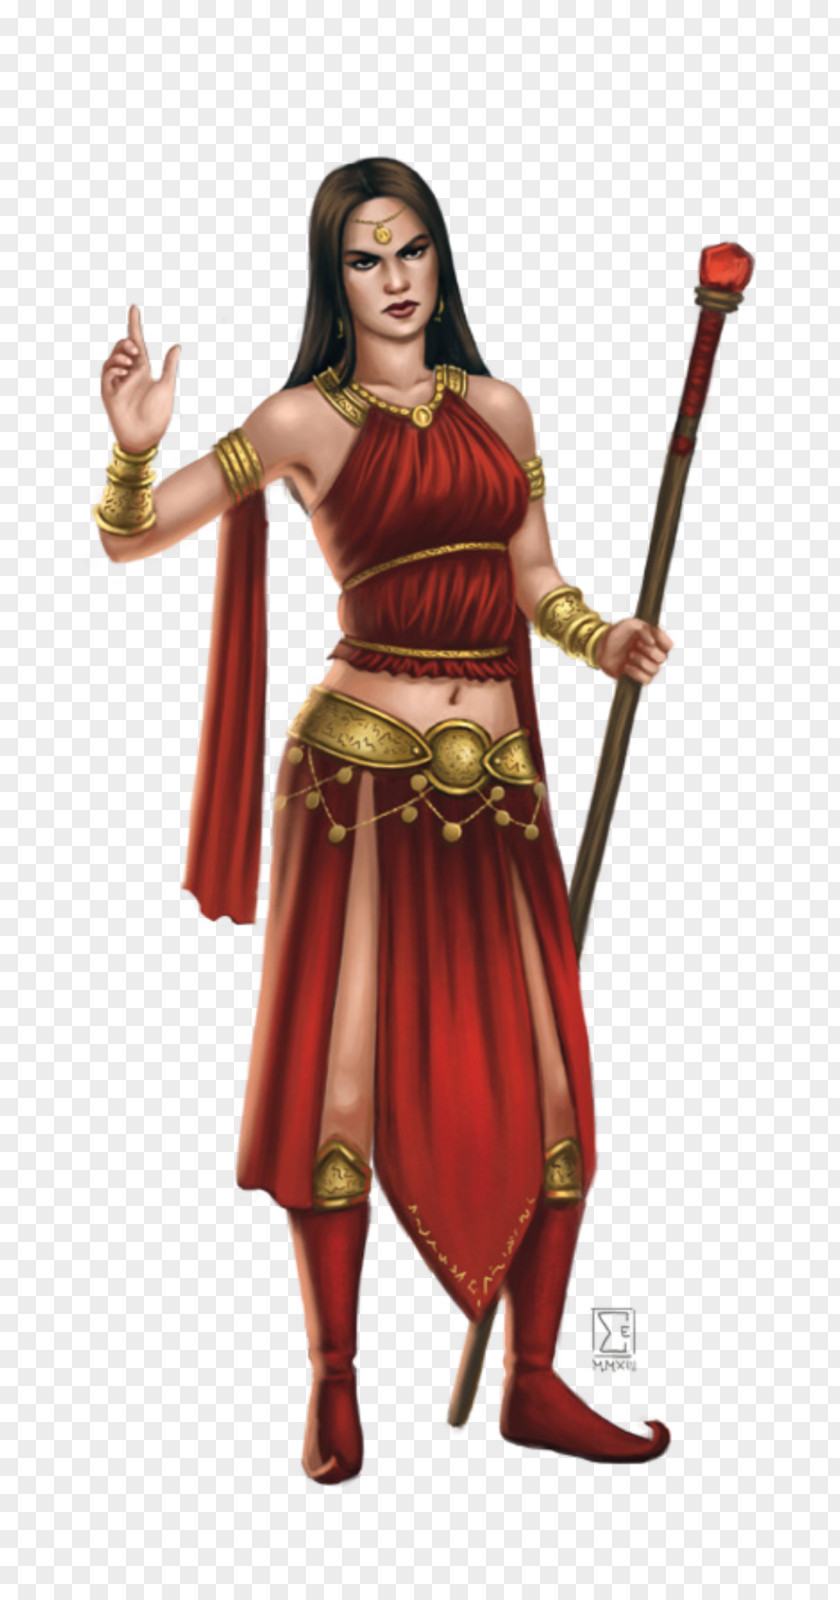 Wizard Dungeons & Dragons Pathfinder Roleplaying Game D20 System Woman PNG